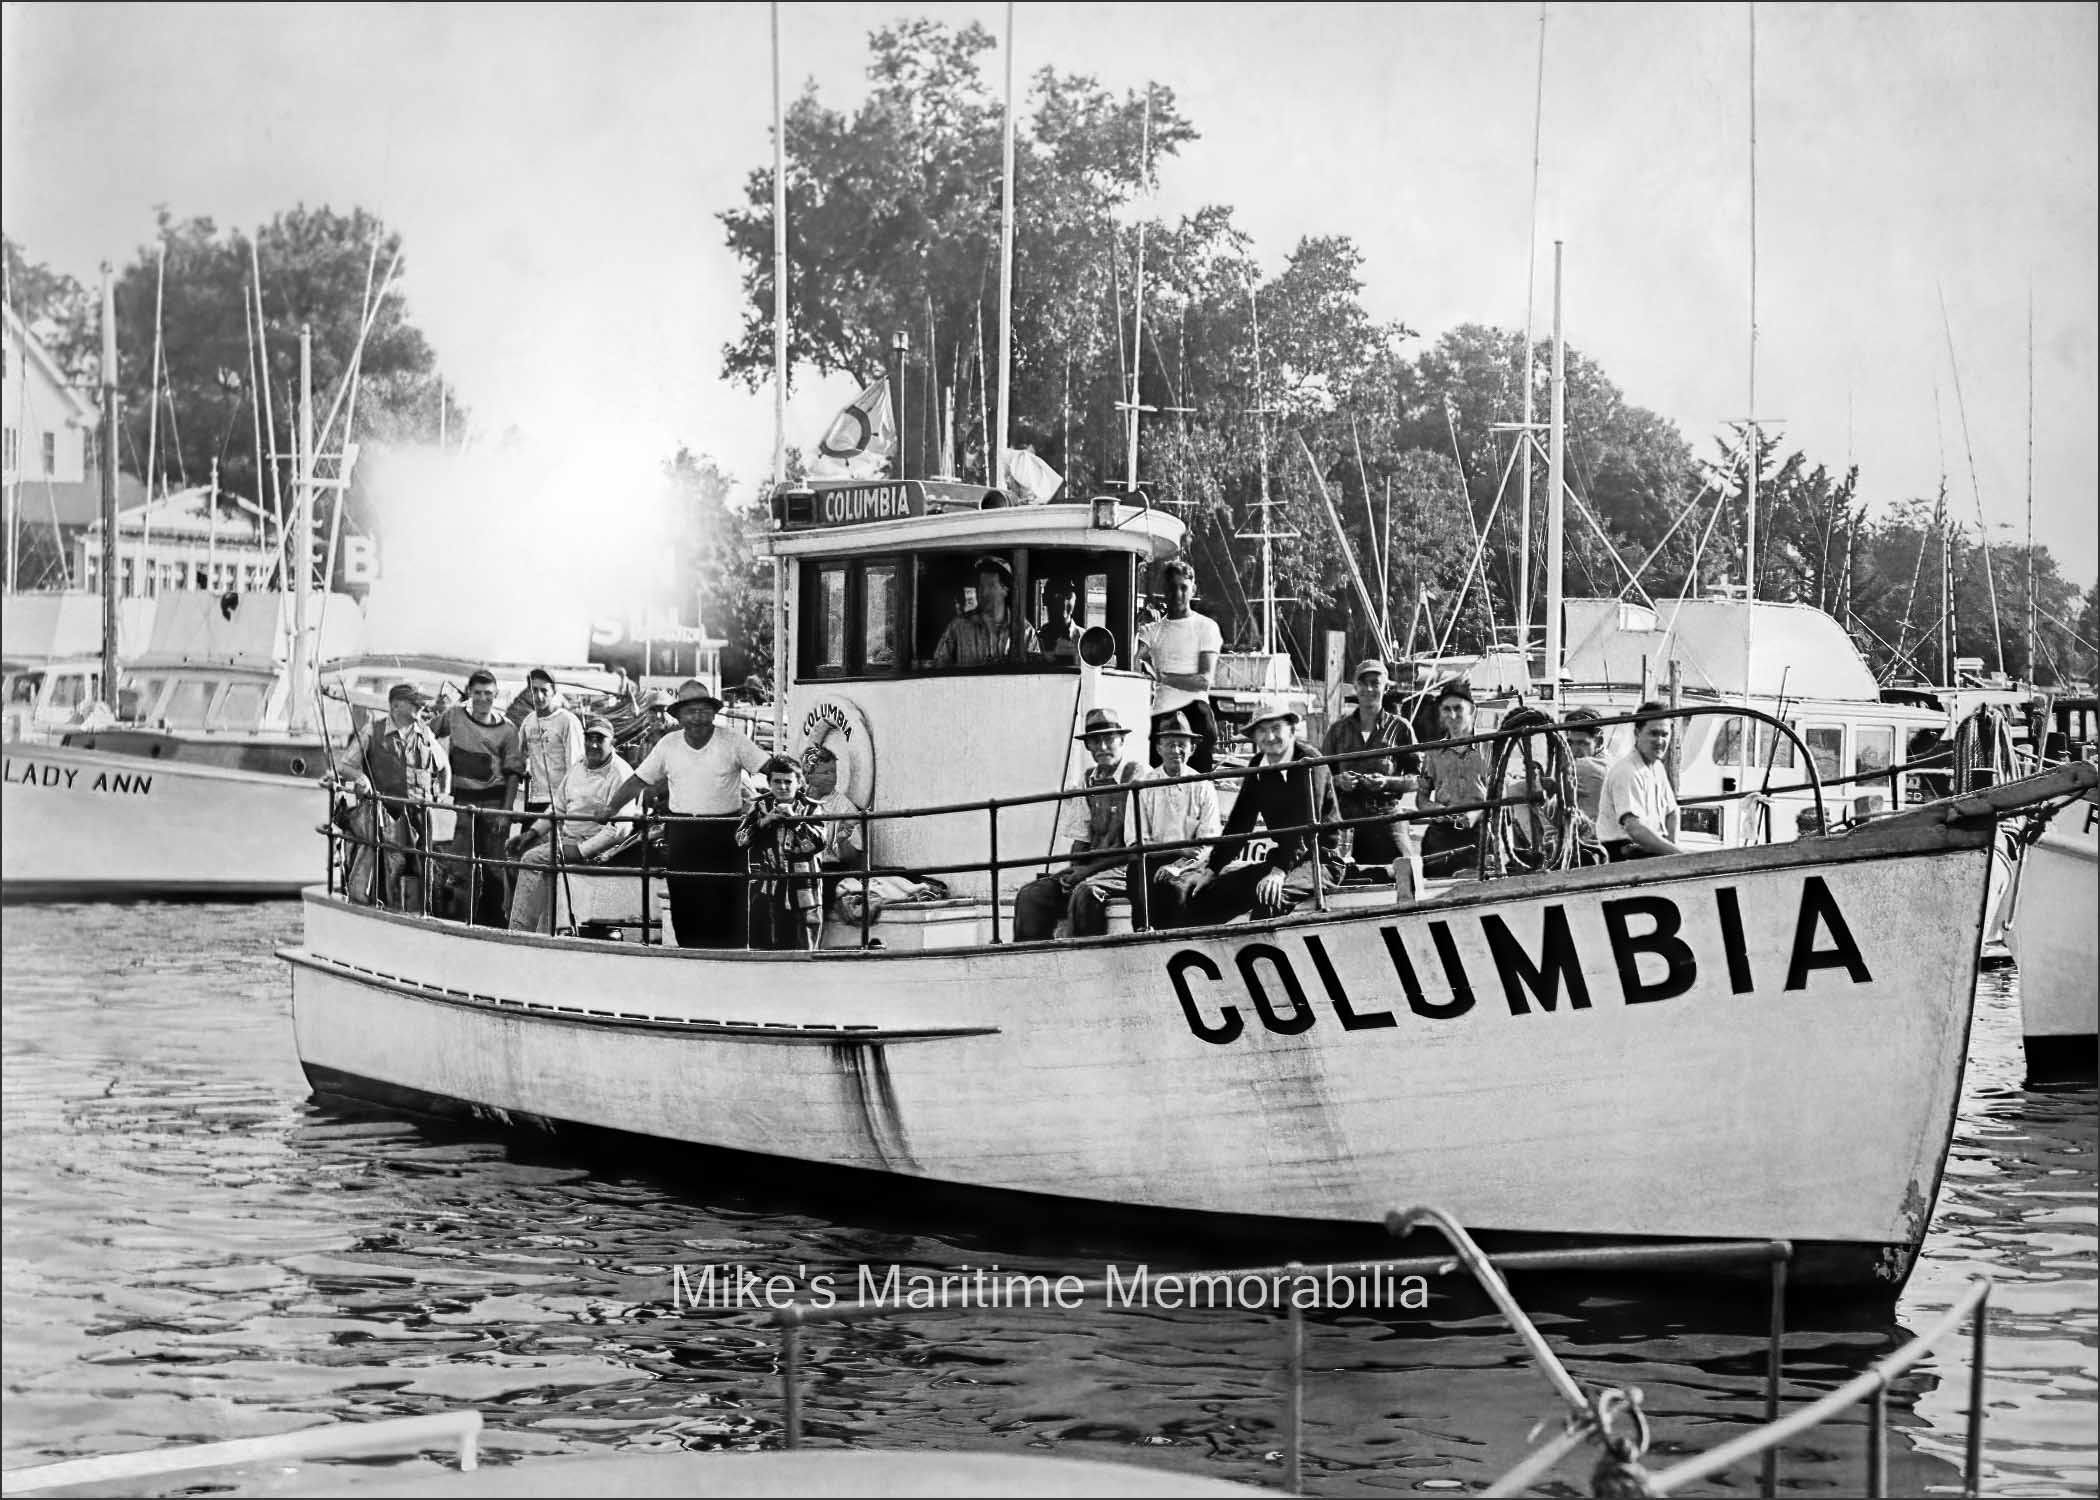 COLUMBIA, Brielle, NJ – 1947 The "COLUMBIA" departing the dock on June 30, 1947. The "COLUMBIA" was a 45-footer built in 1940 by the Johnson Brothers Boat Works at Bay Head, NJ for the Bogan family and operated by Captains Jack Bogan and Fred Laub. An Edward Scheckler, Sea Girt, NJ photograph.